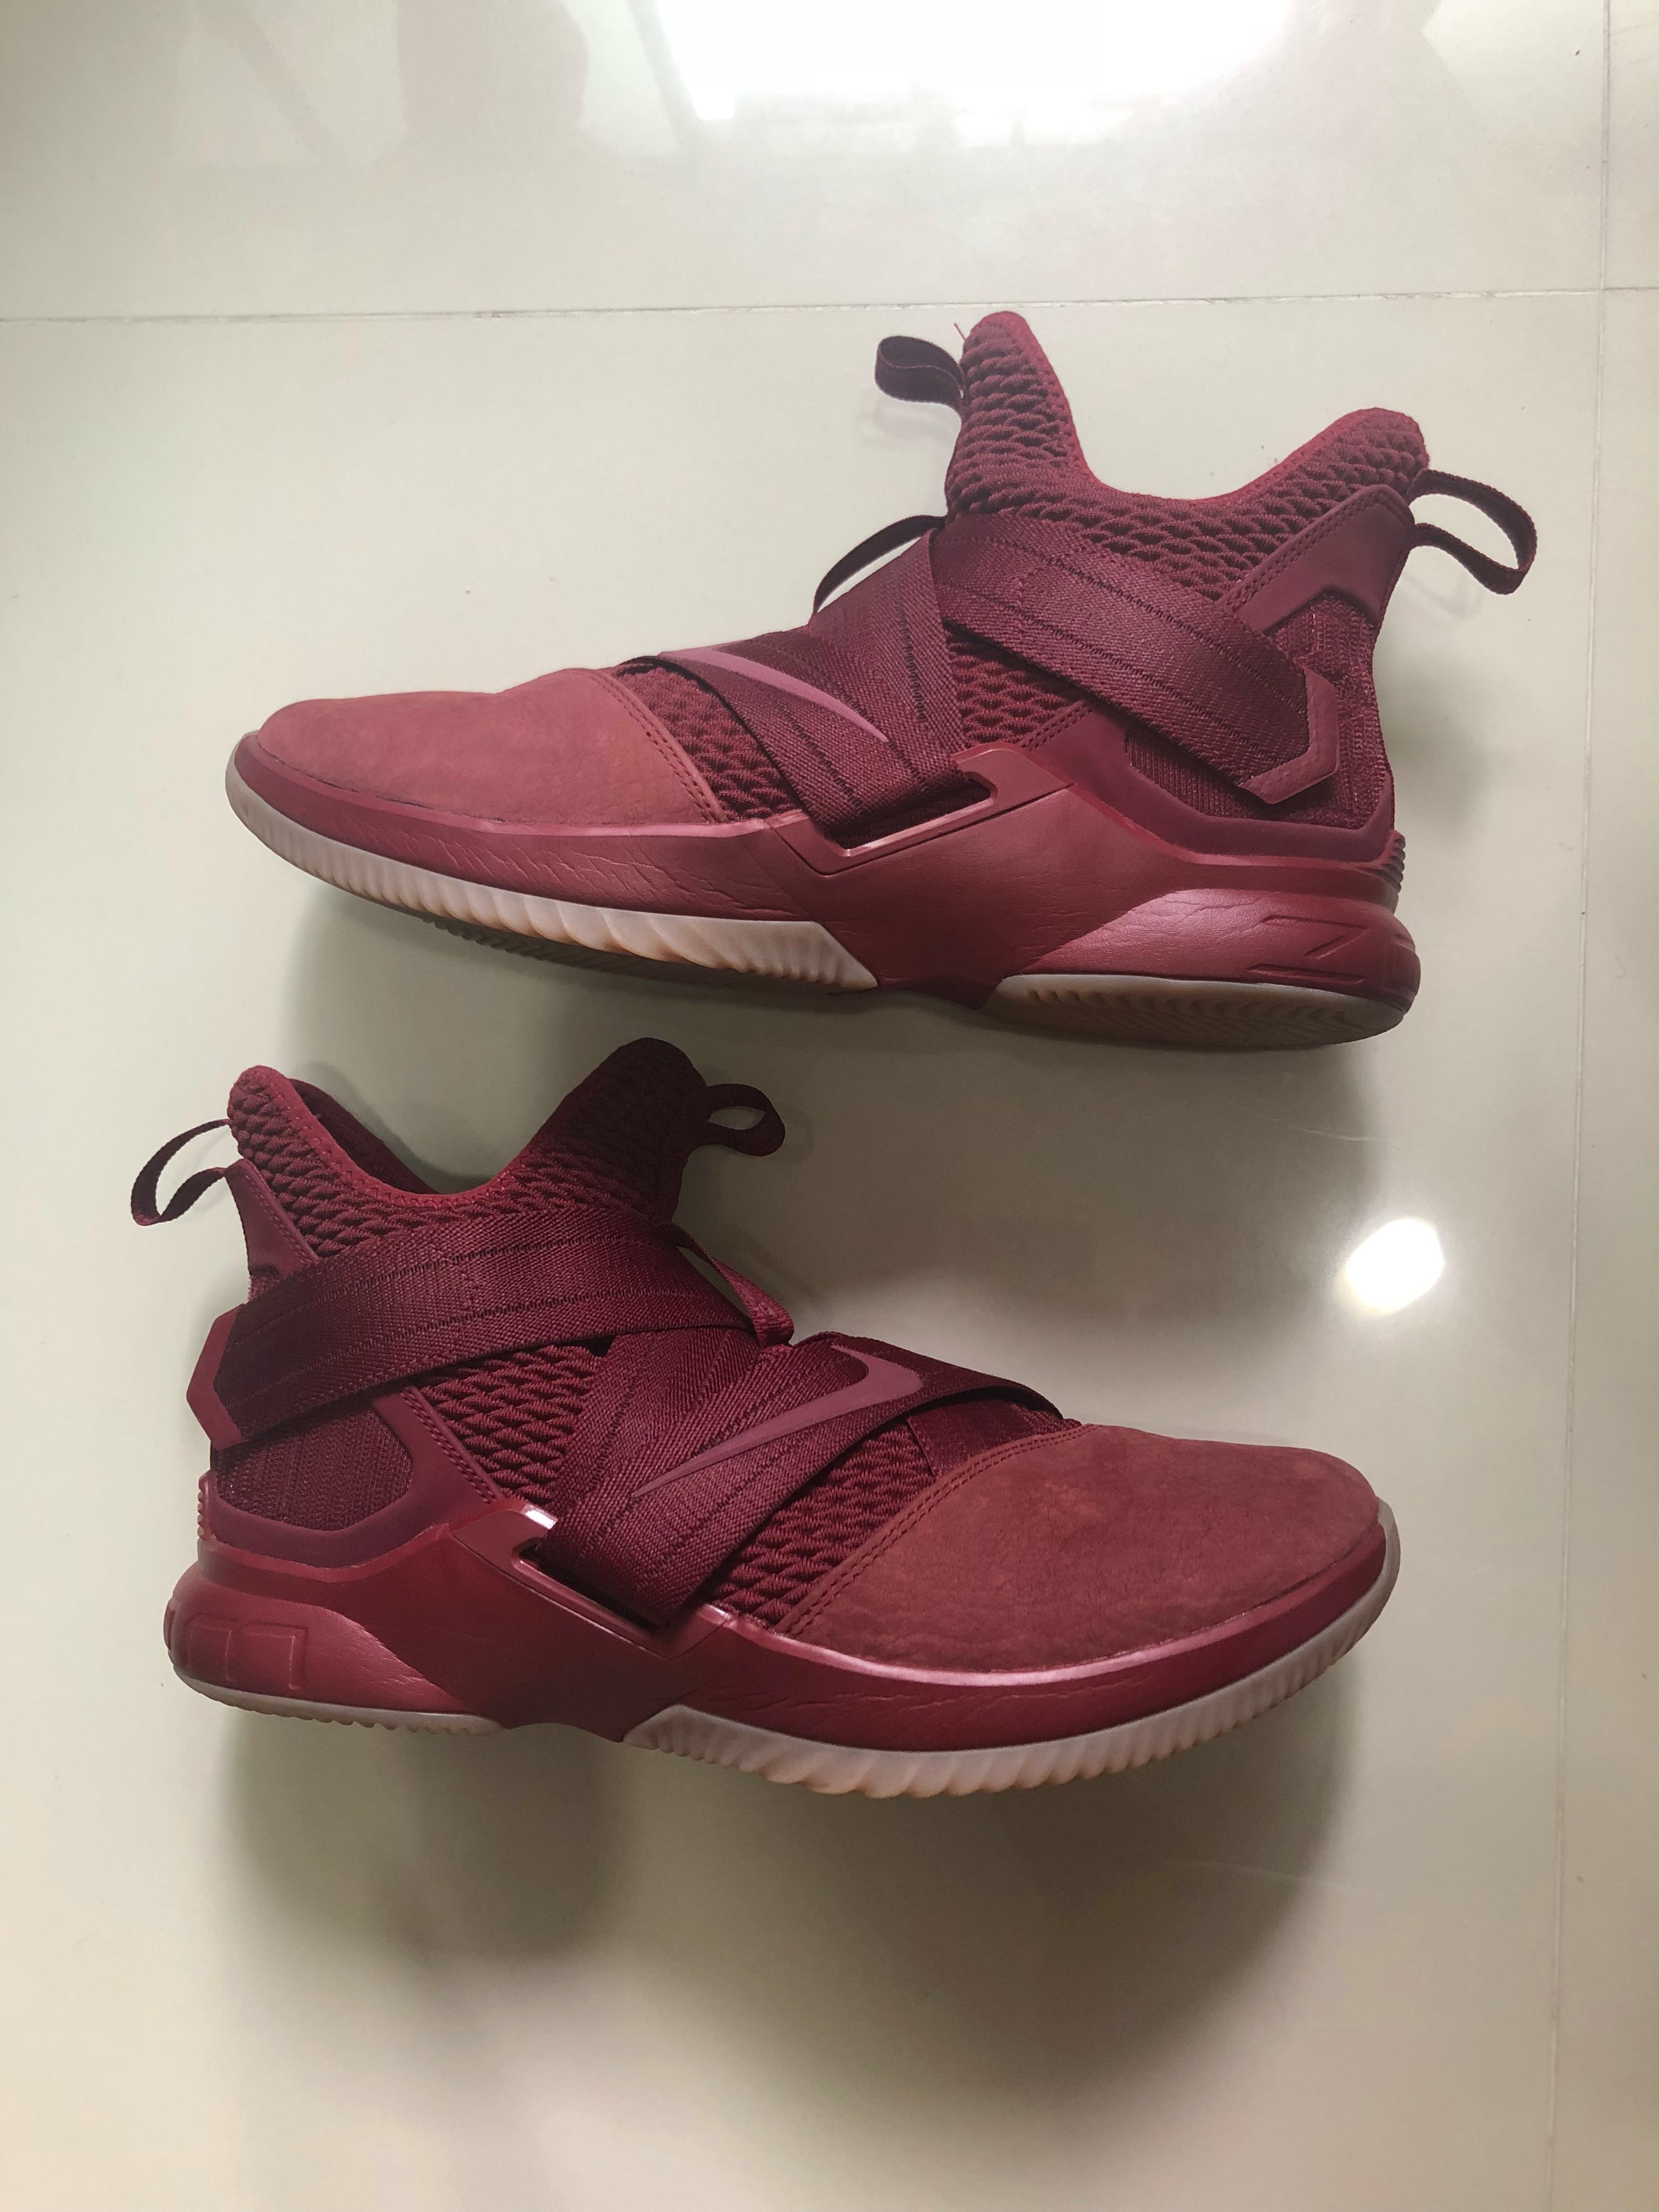 lebron soldier 12 sfg red